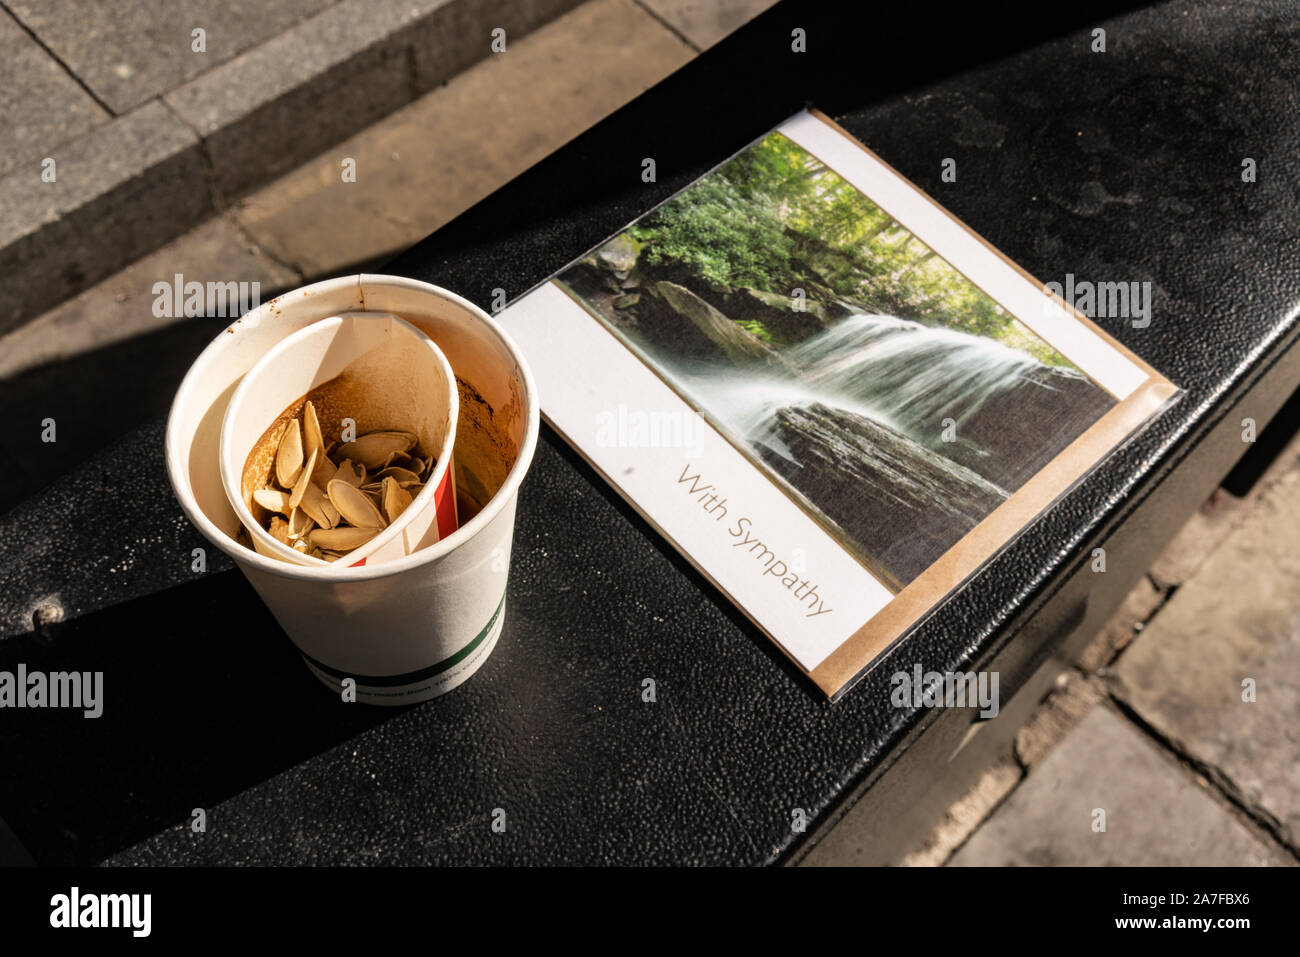 I found this discarded coffee cup and with sympathy card left behind on a rail outside a business building, London UK Stock Photo